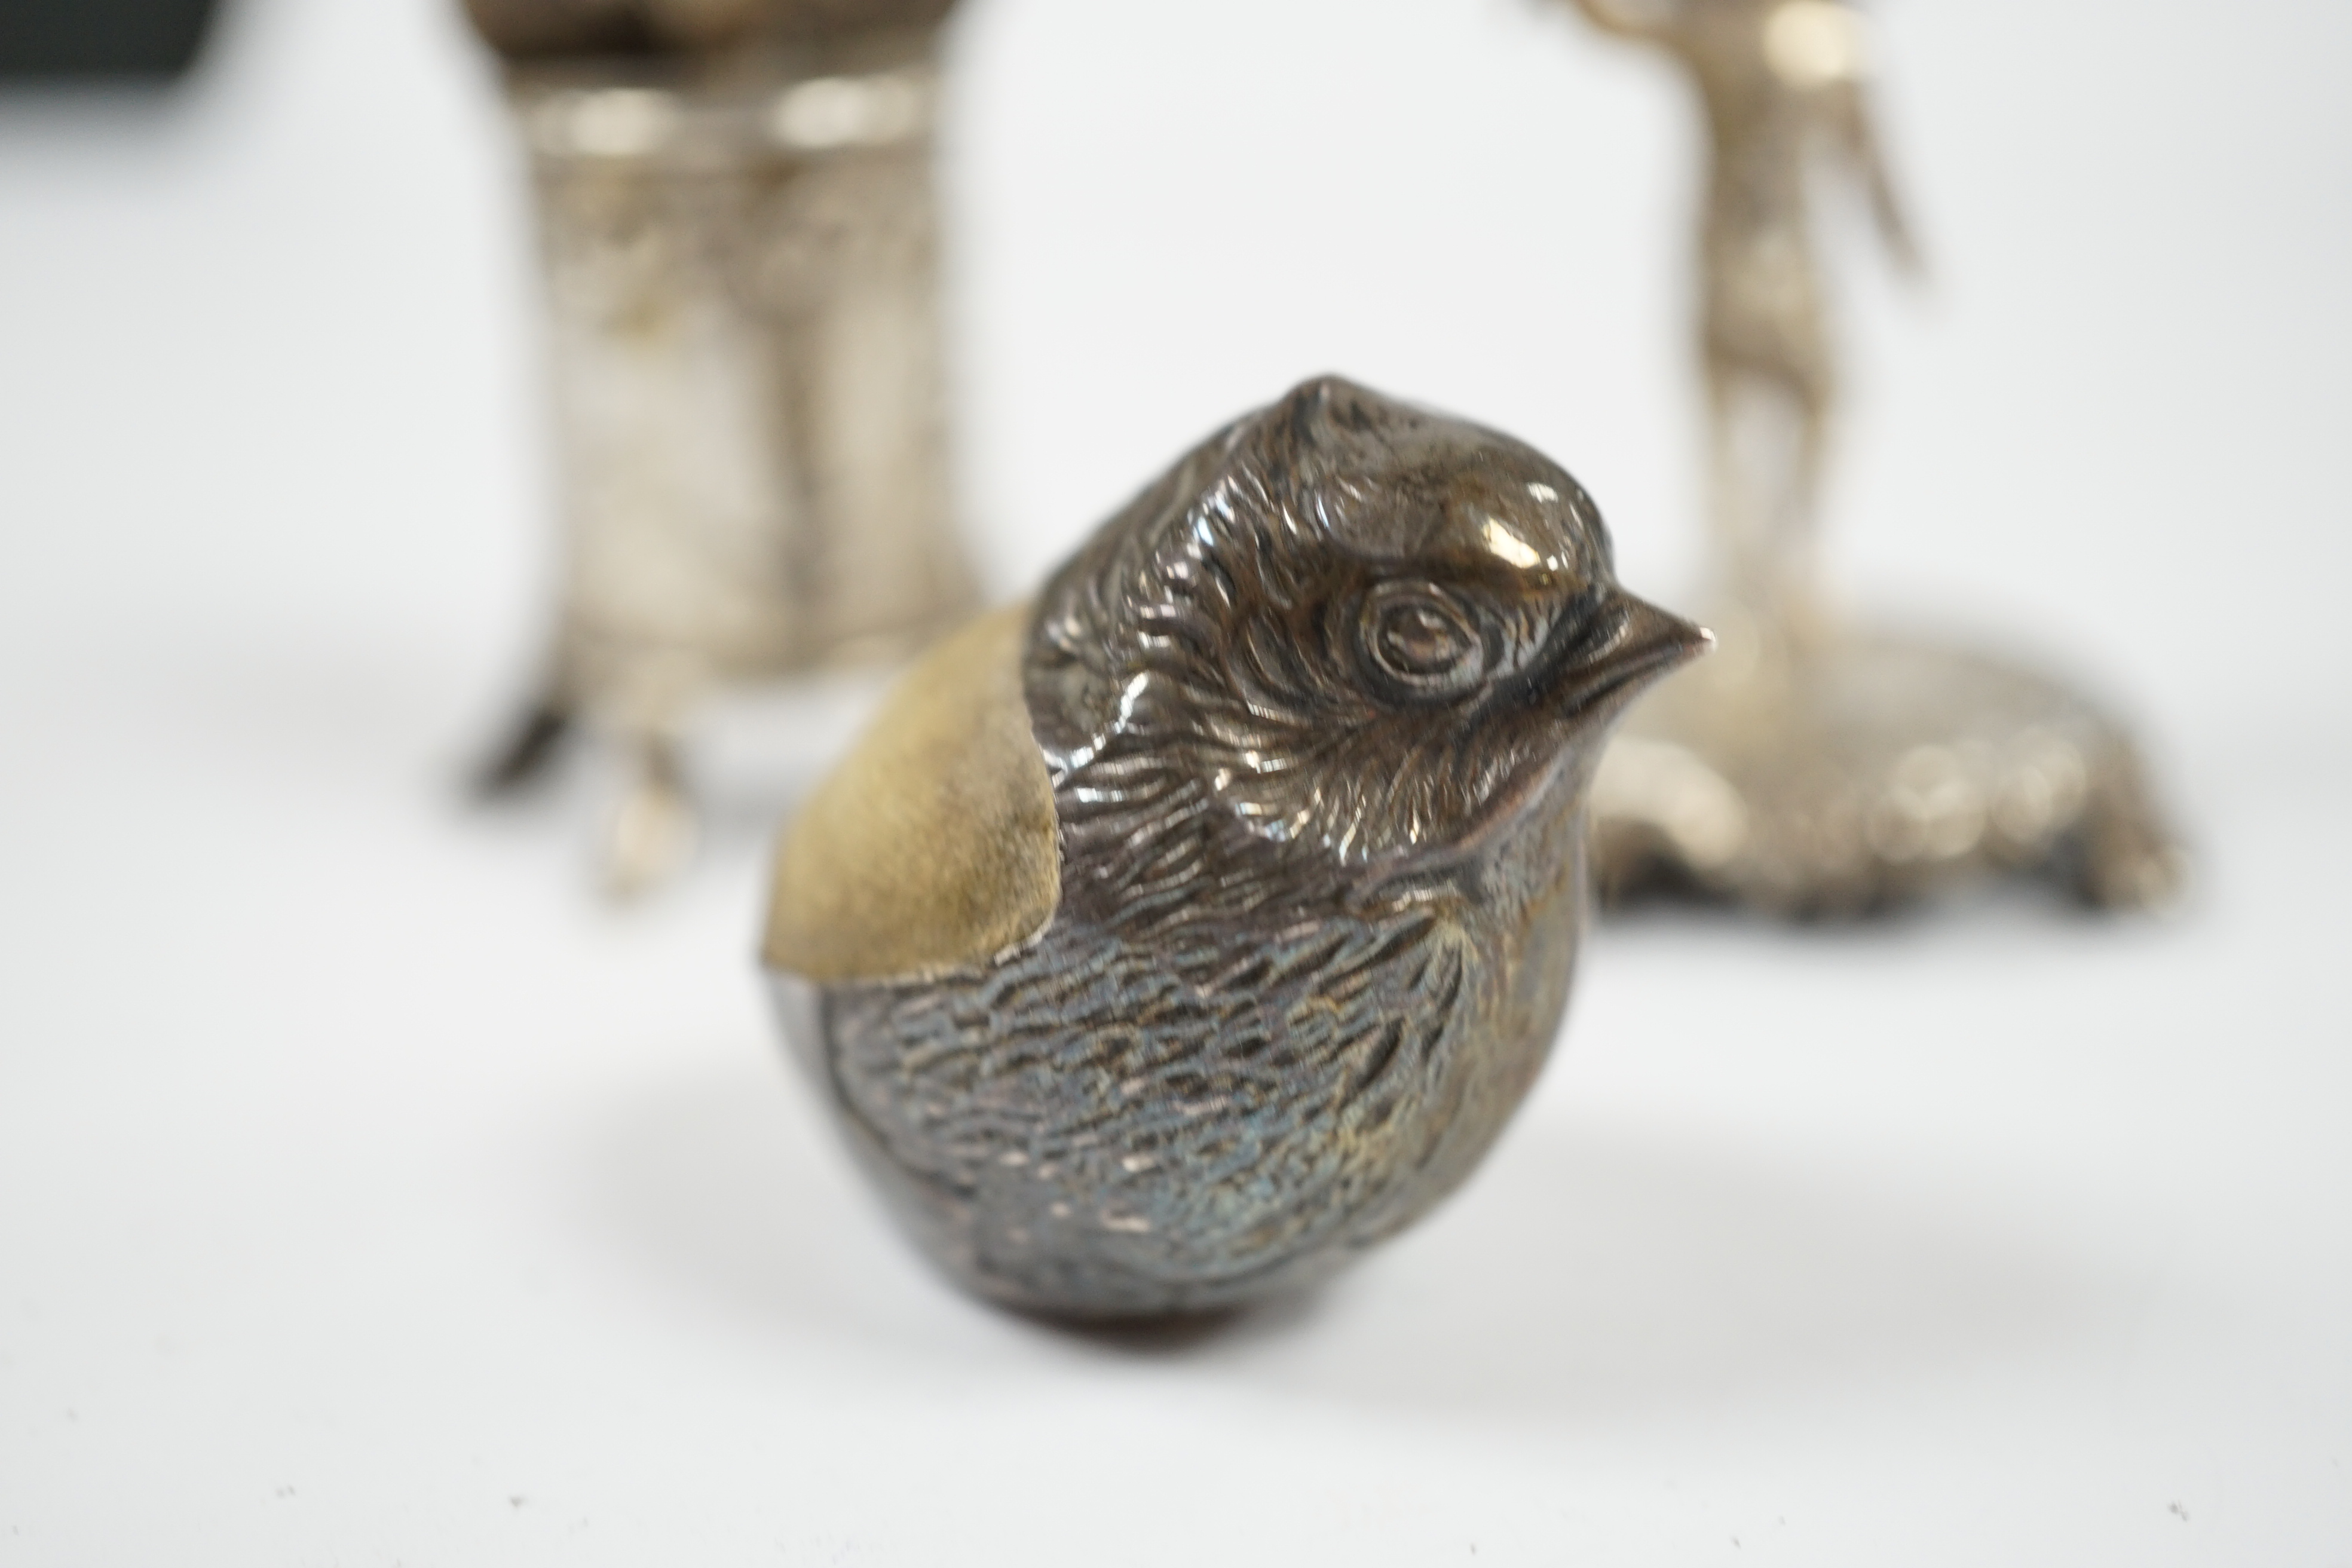 An Edwardian silver mounted 'hatching chick' pin cushion, by Sampson Mordan & Co, Chester, 1908, 29mm, together with two miniature silver groups with import marks. Condition - fair